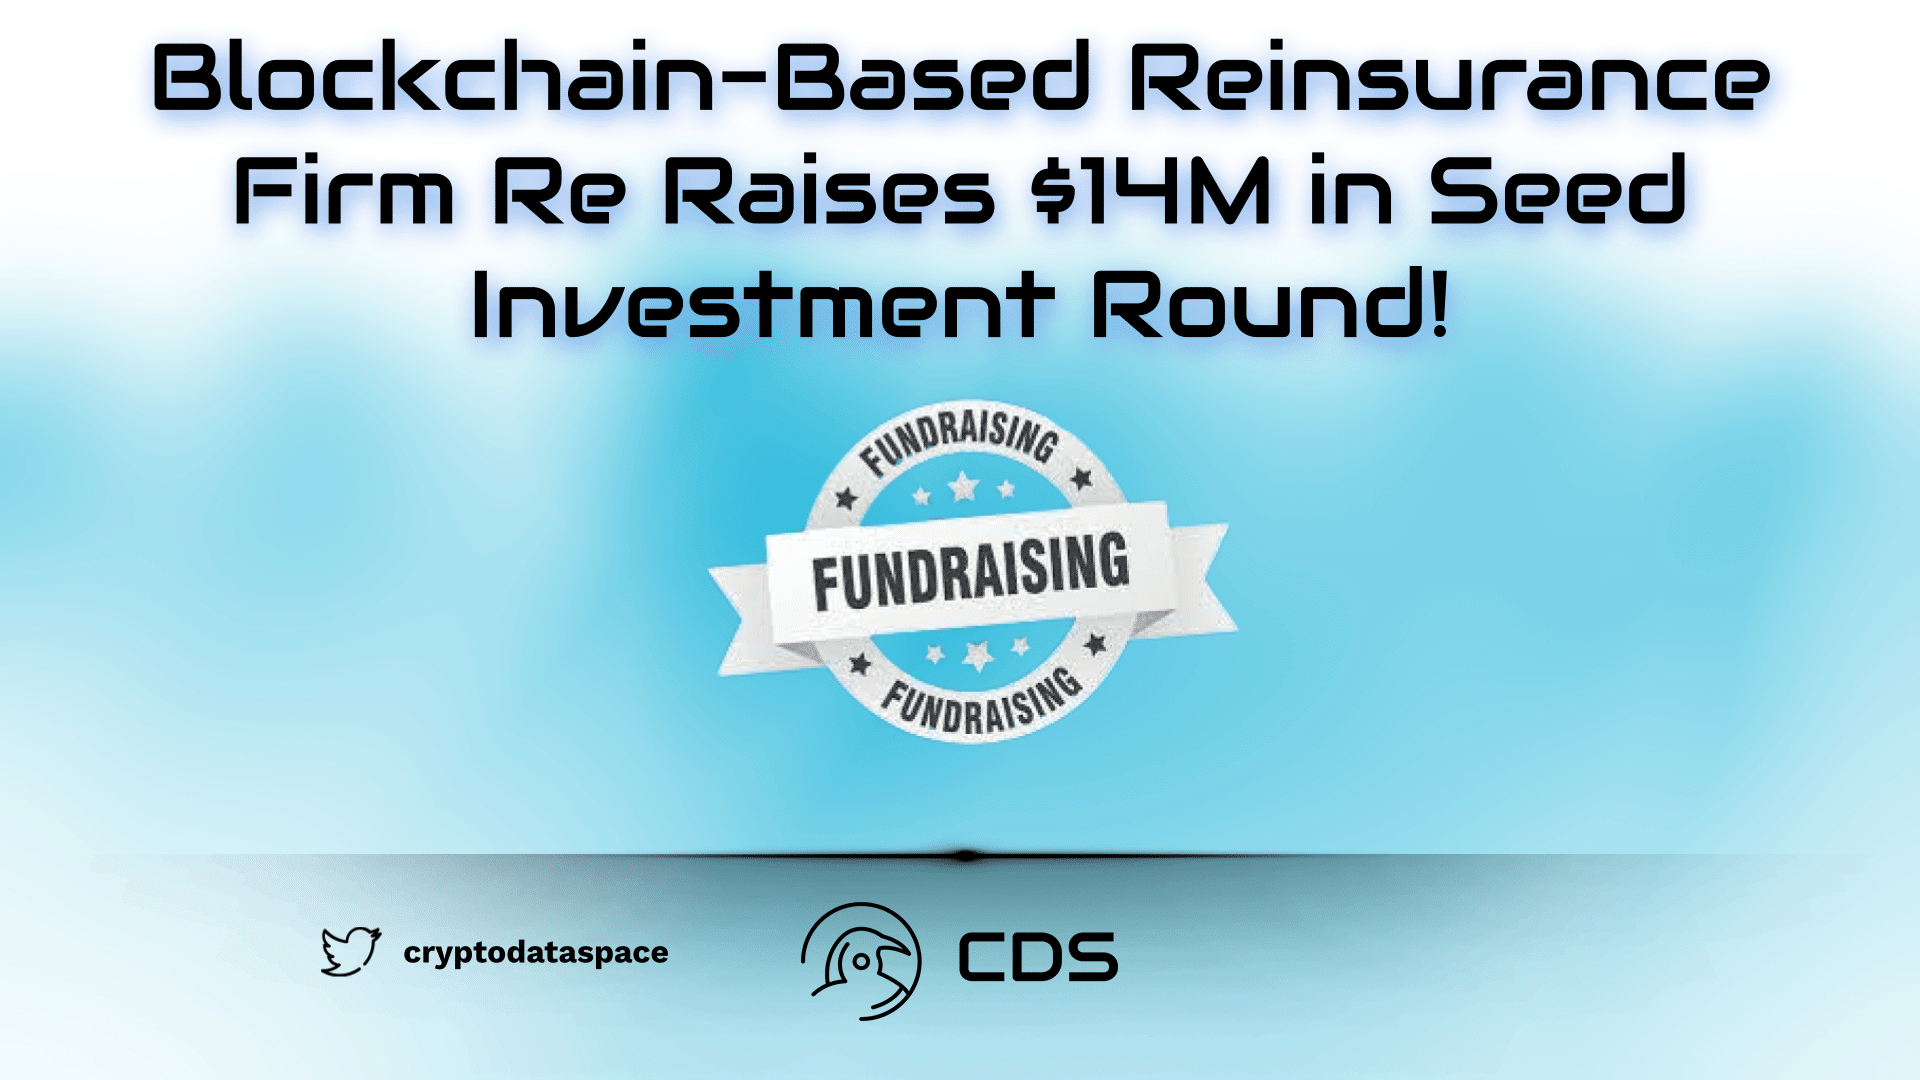 Blockchain-Based Reinsurance Firm Re Raises $14M in Seed Investment Round